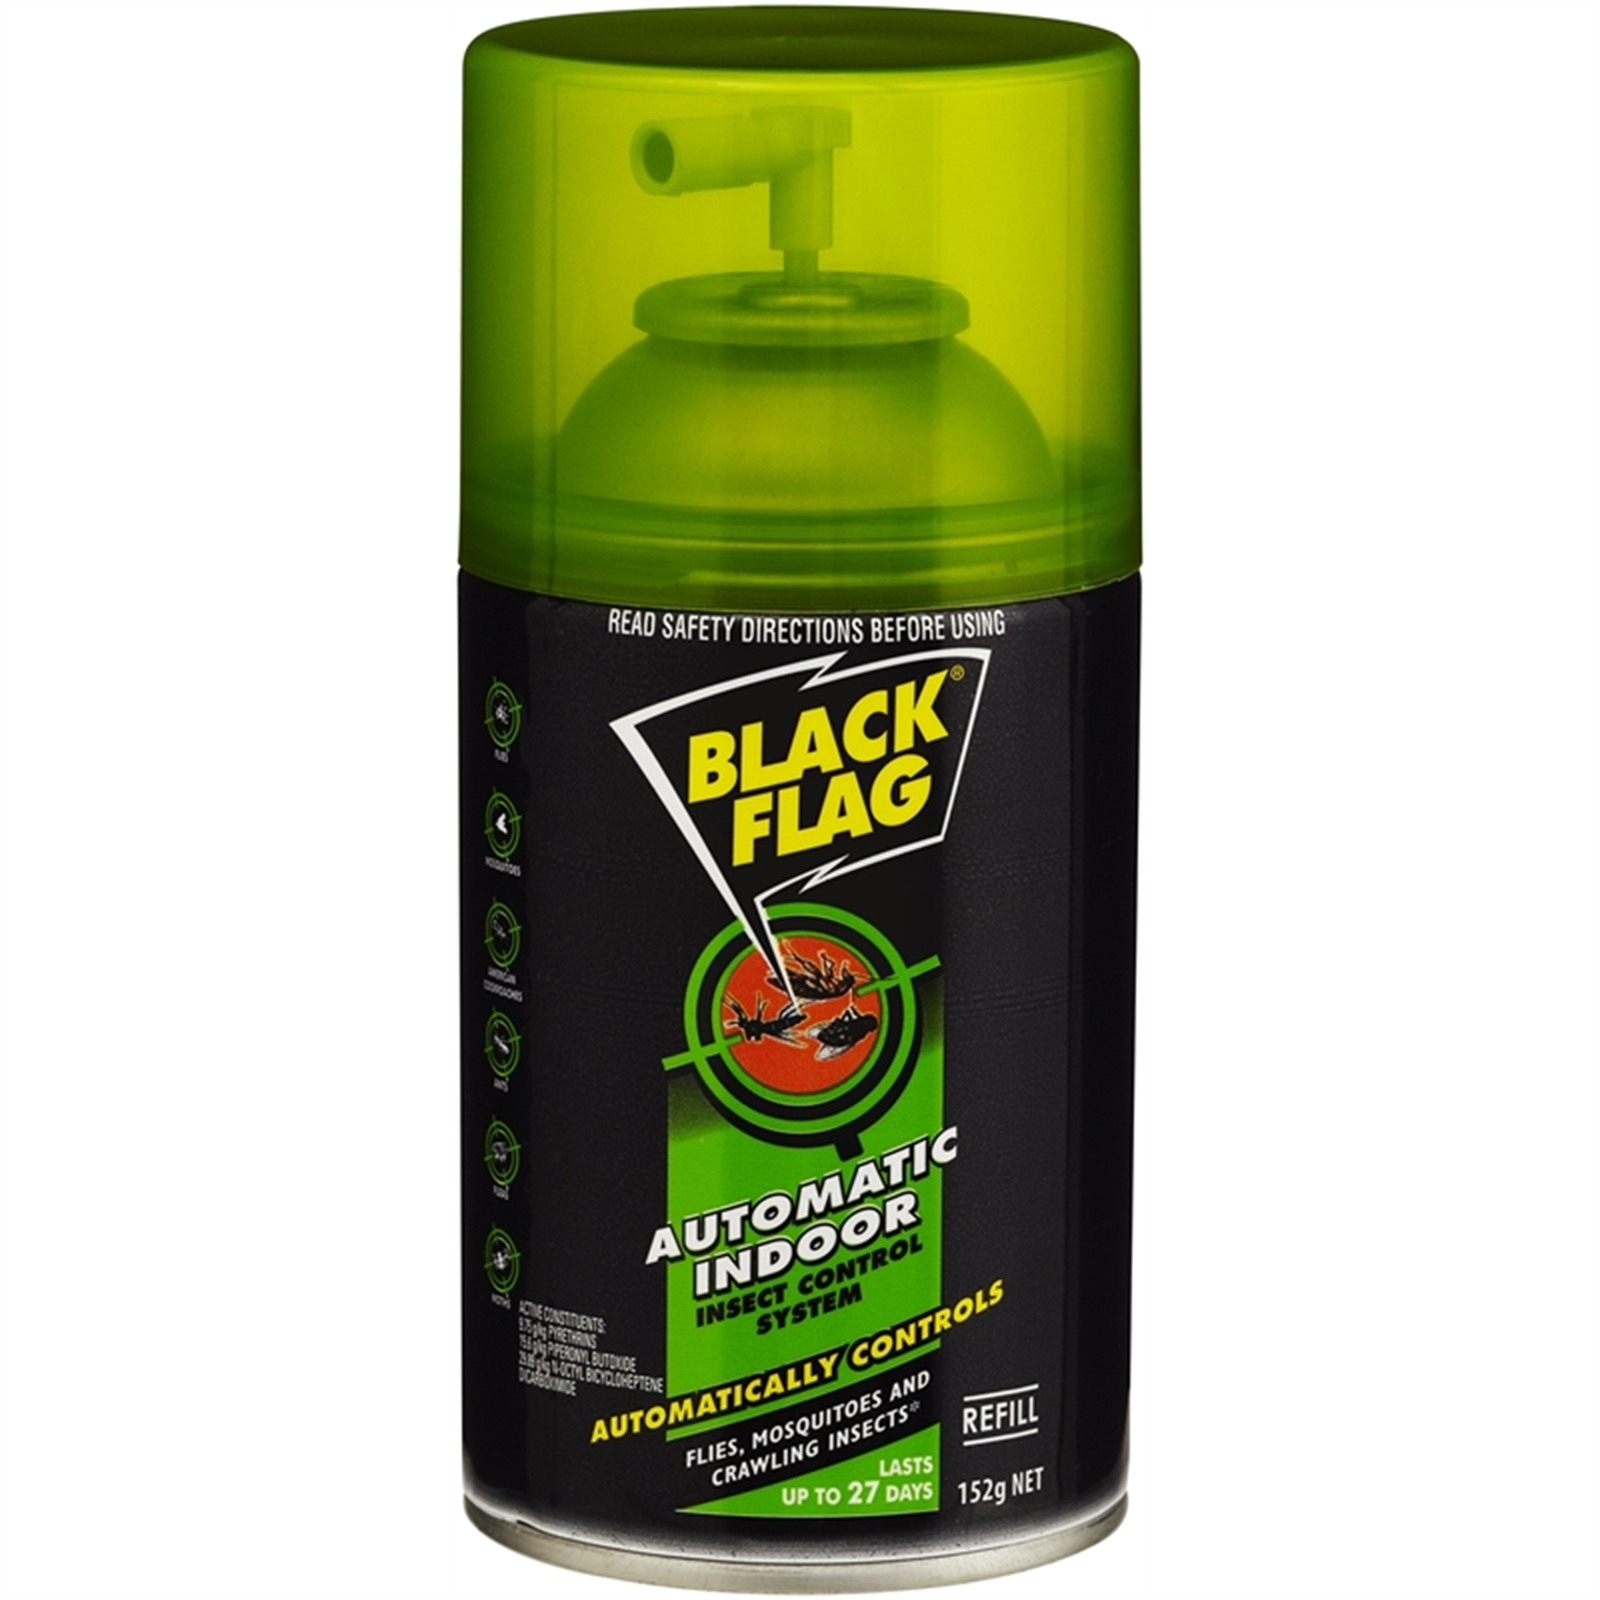 Black Flag Automatic Indoor Insect Control Refill